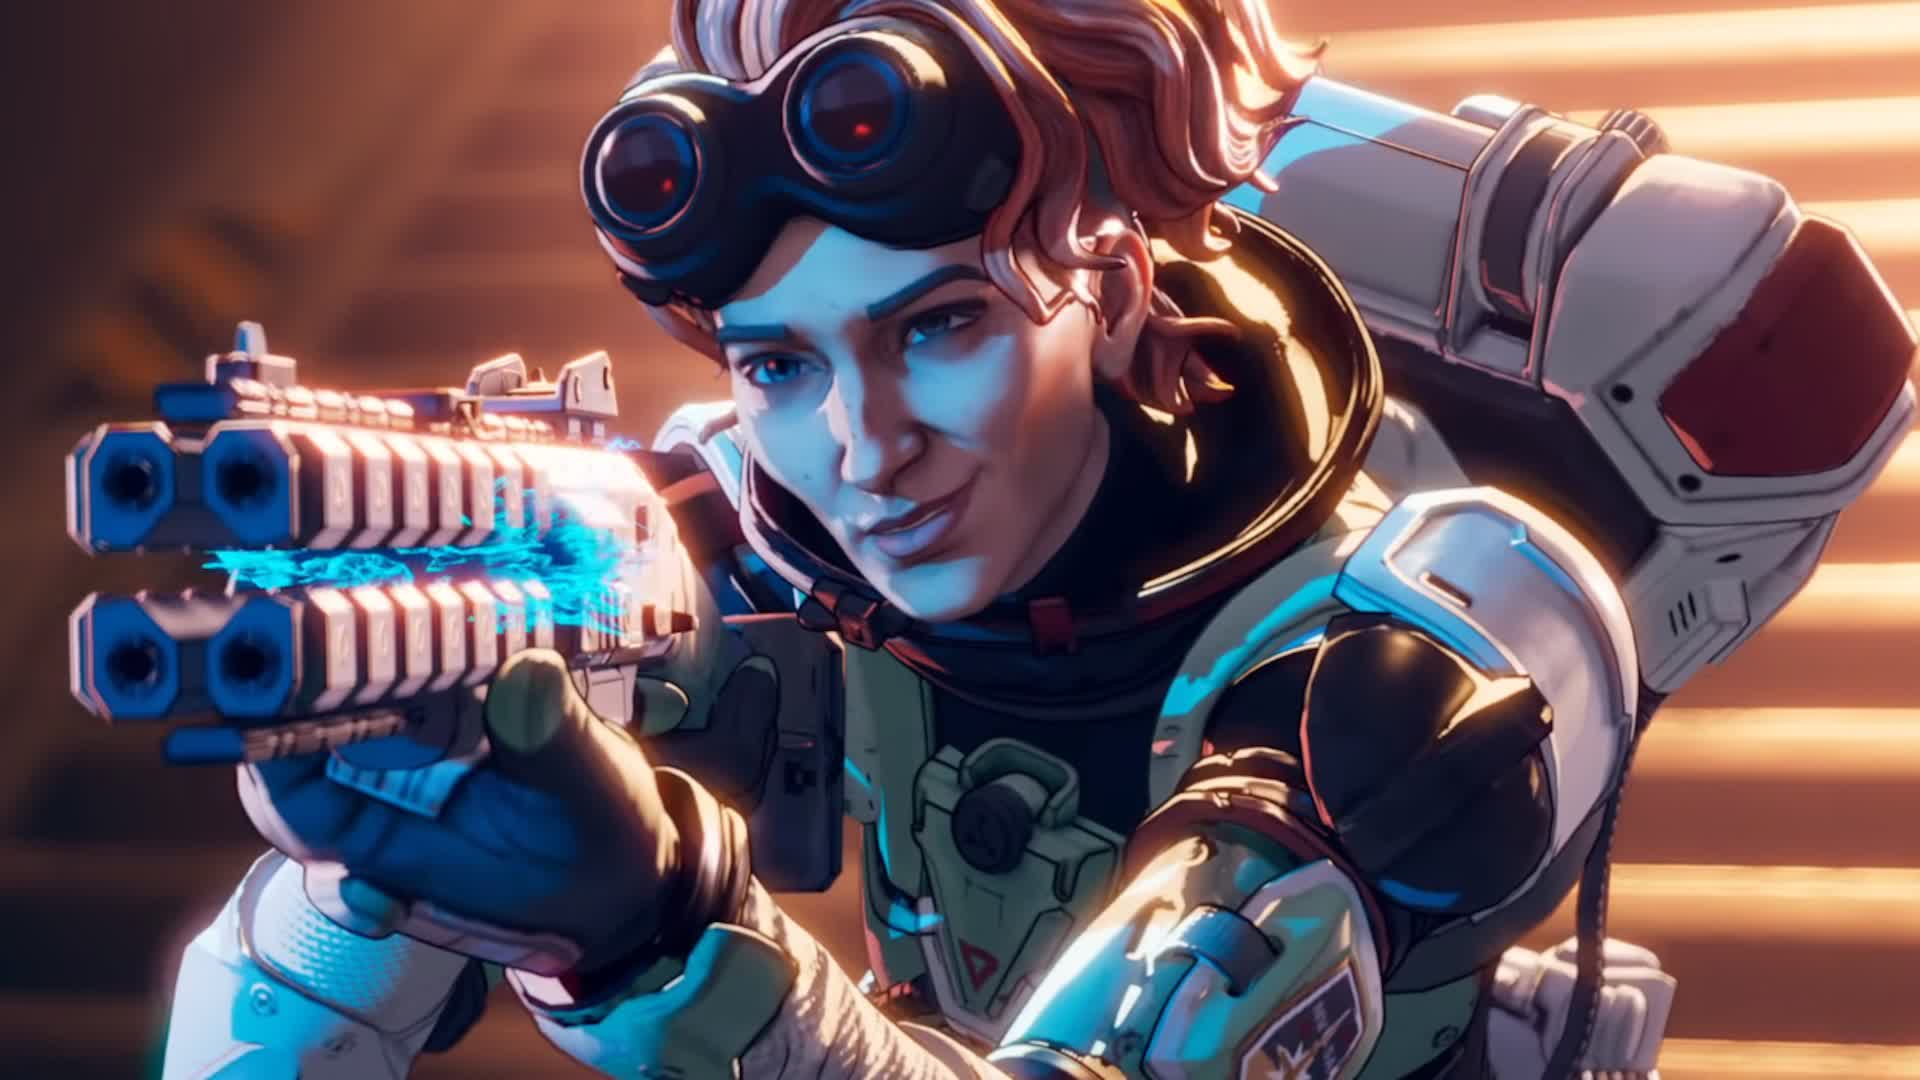 Police drop in on streamer after hearing him shouting for help during Apex Legends game